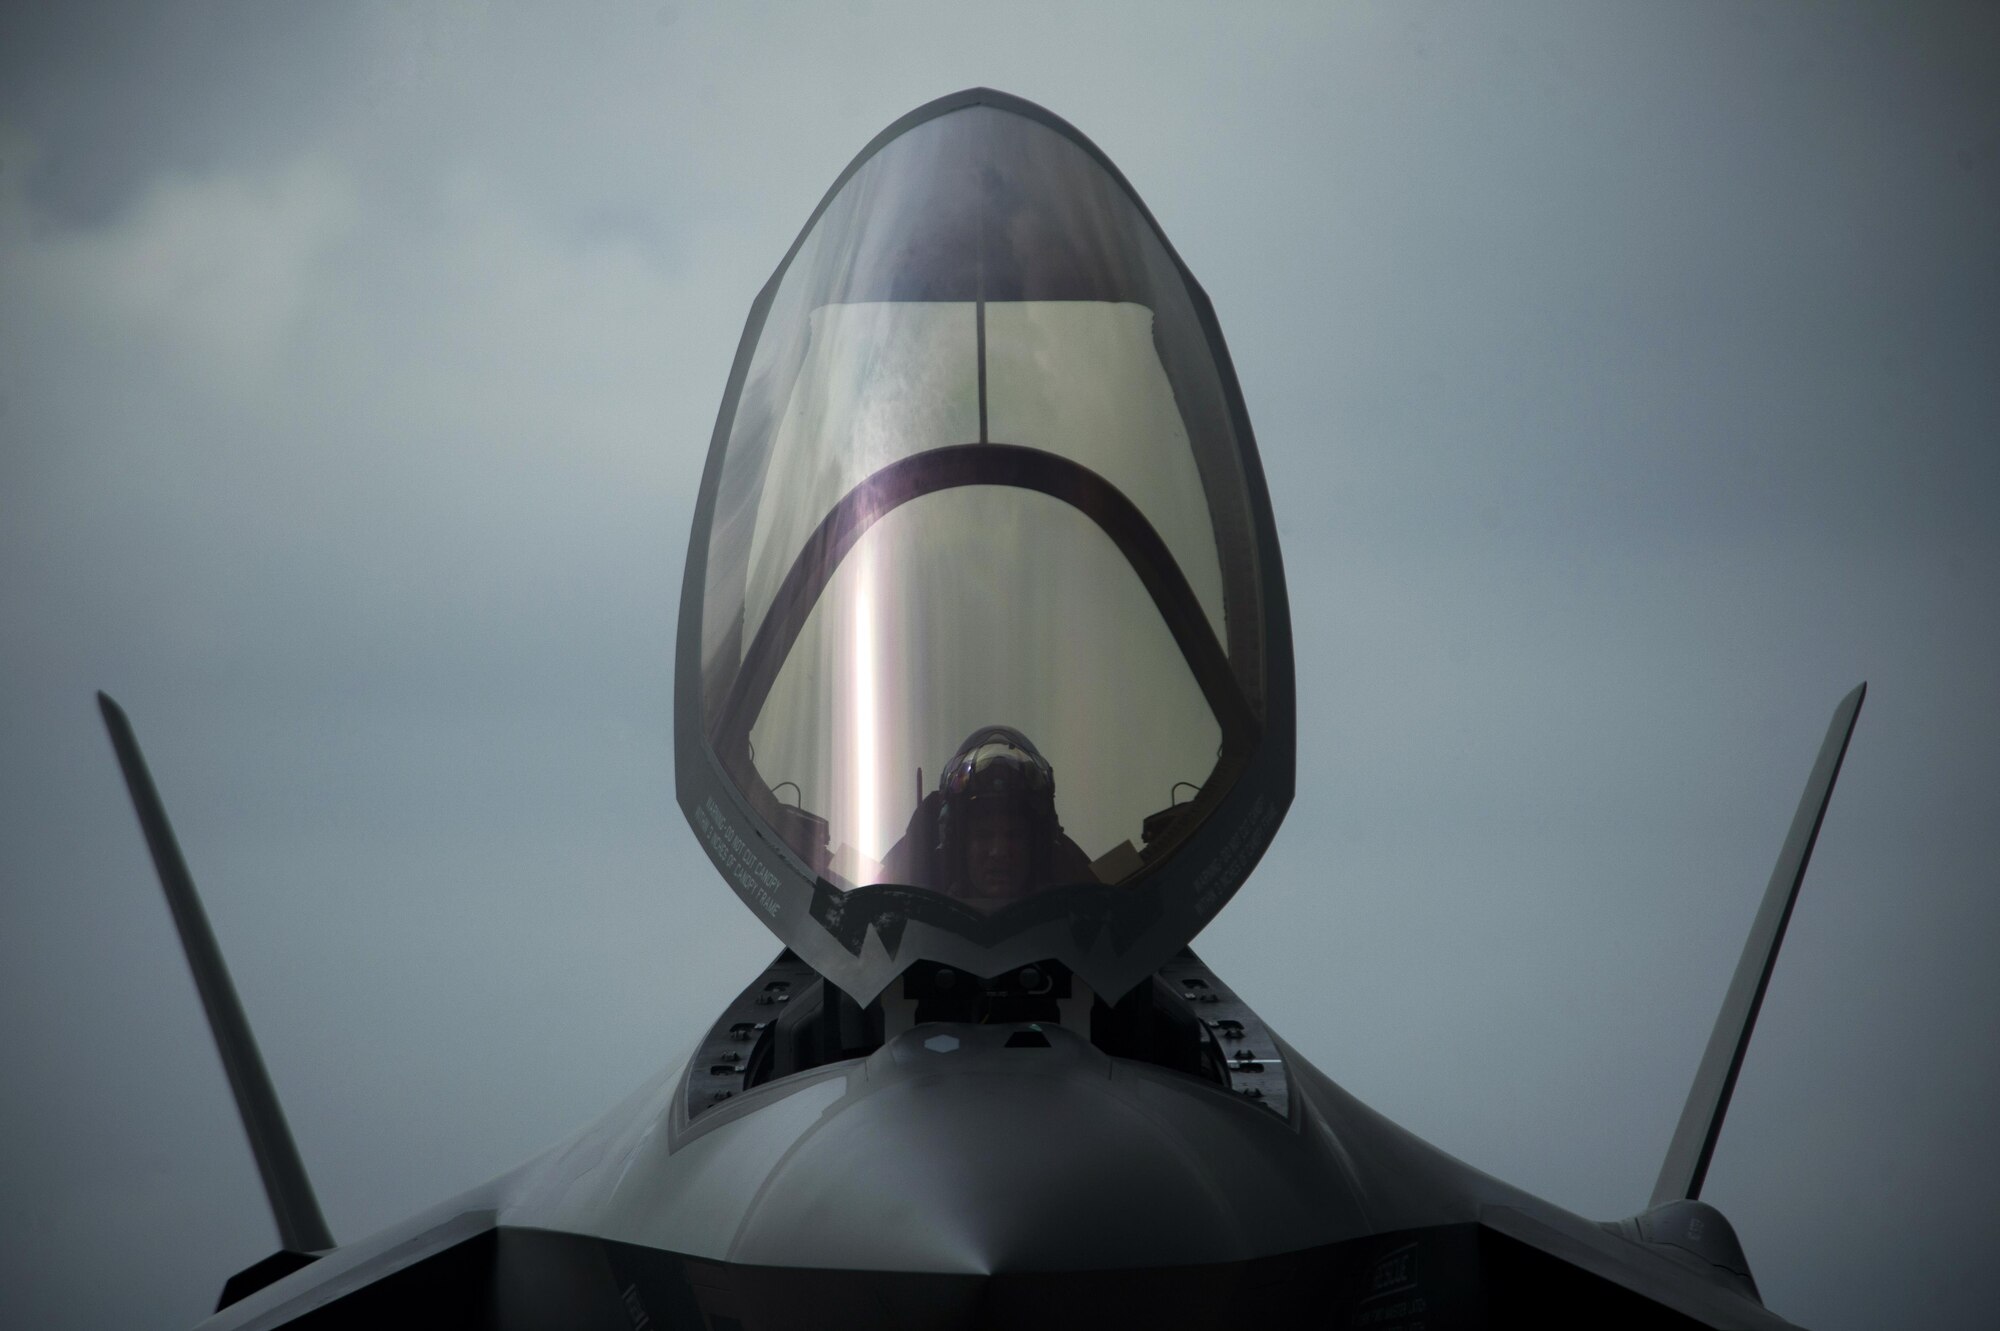 An F-35A Lightning II pilot from the 34th Fighter Squadron, assigned to Hill Air Force Base, Utah, completes pre-flight checks prior to departing Royal Air Force Lakenheath, England, May 7. While at RAF Lakenheath, the squadron flew 76 sorties, tallying more than 154 flying hours, and forward deployed to Estonia and Bulgaria to maximize training opportunities, build partnerships with allied air forces and familiarize Airmen with Europe’s broad and diverse operating conditions. (U.S. Air Force photo/Master Sgt. Eric Burks)